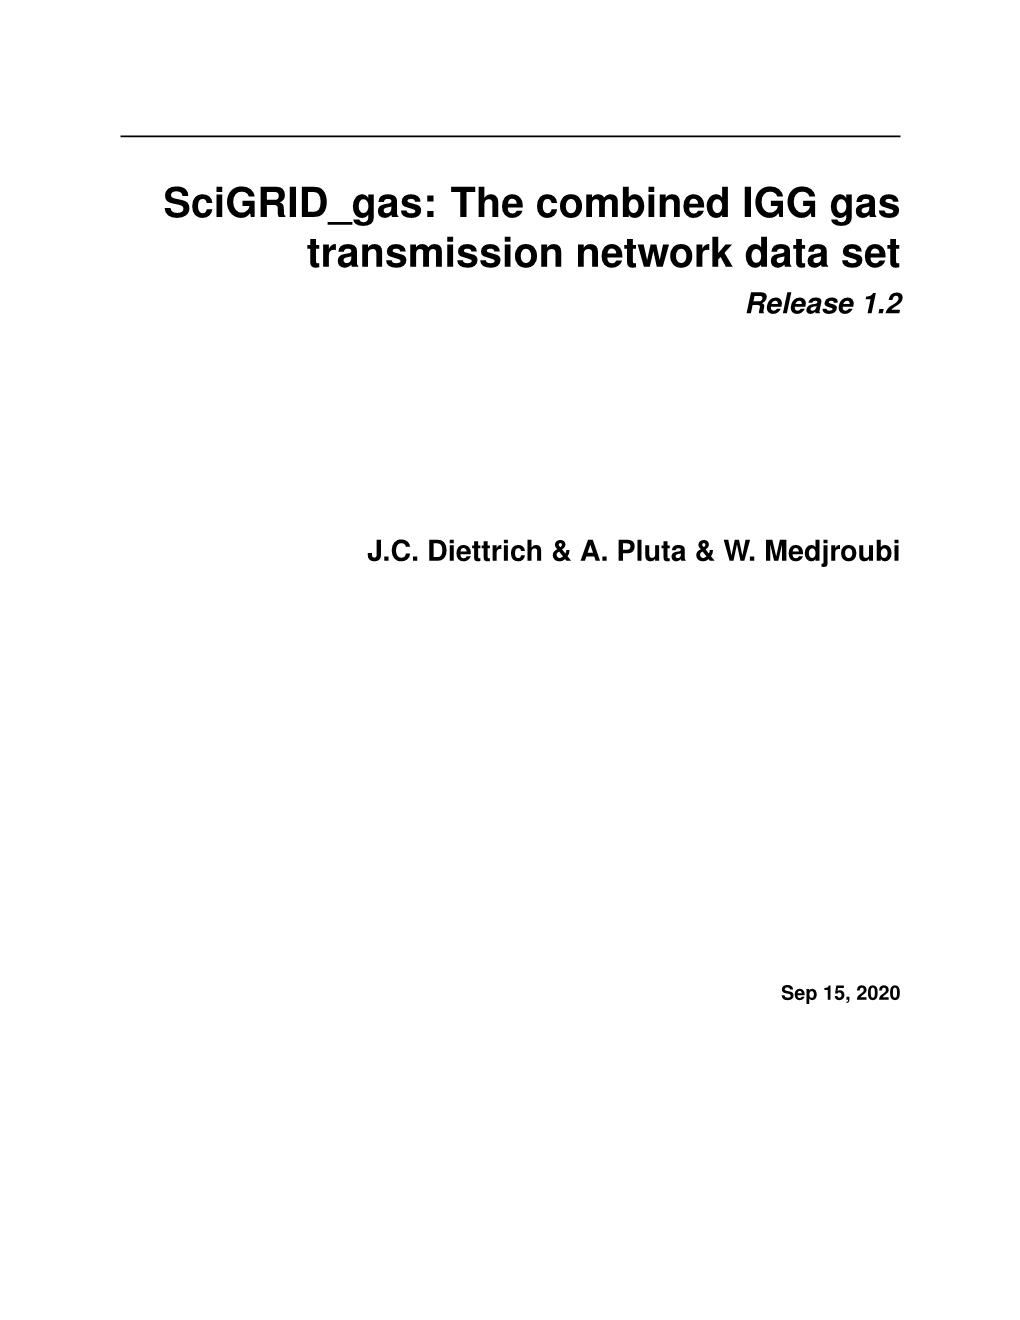 The Combined IGG Gas Transmission Network Data Set Release 1.2